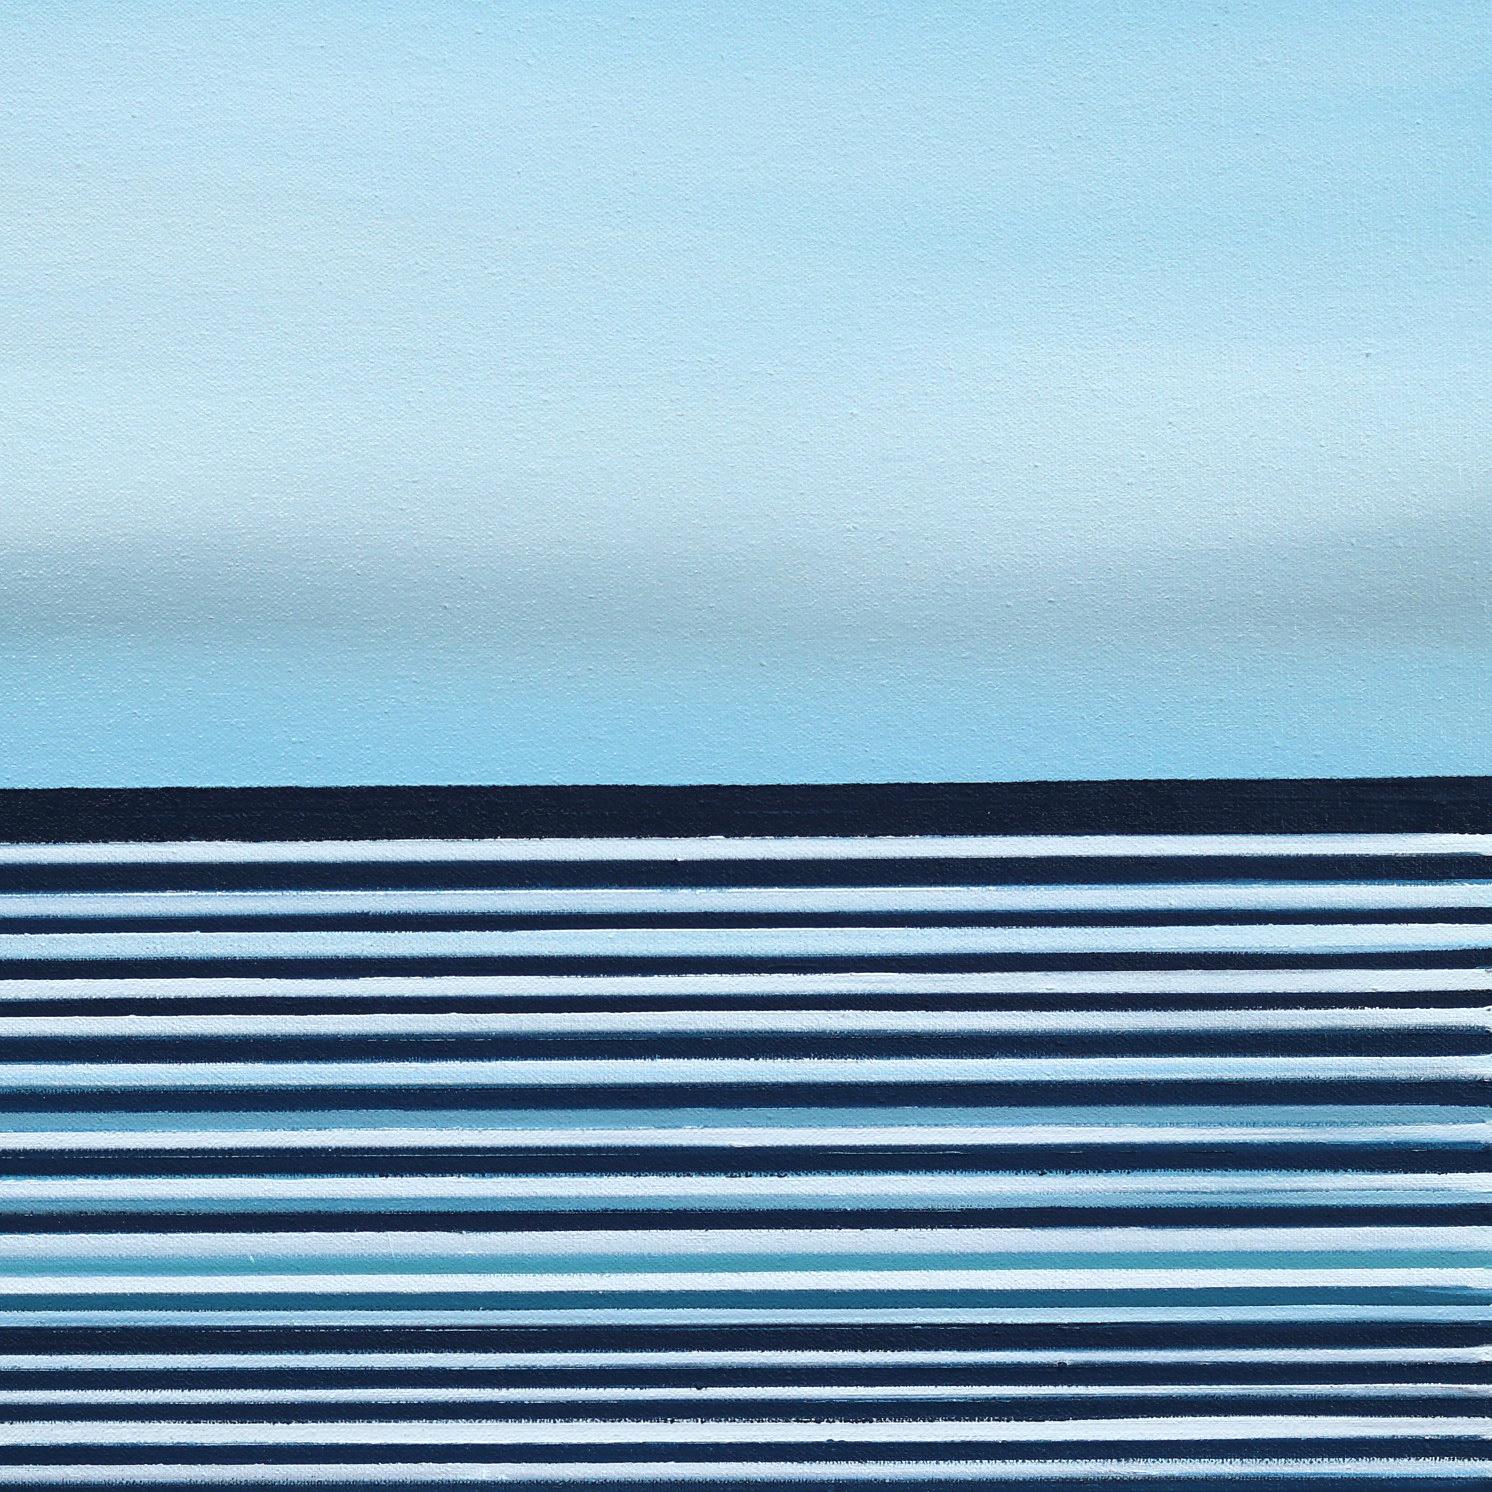 Untitled No. 756 - Framed Contemporary Minimalist Blue Artwork For Sale 6